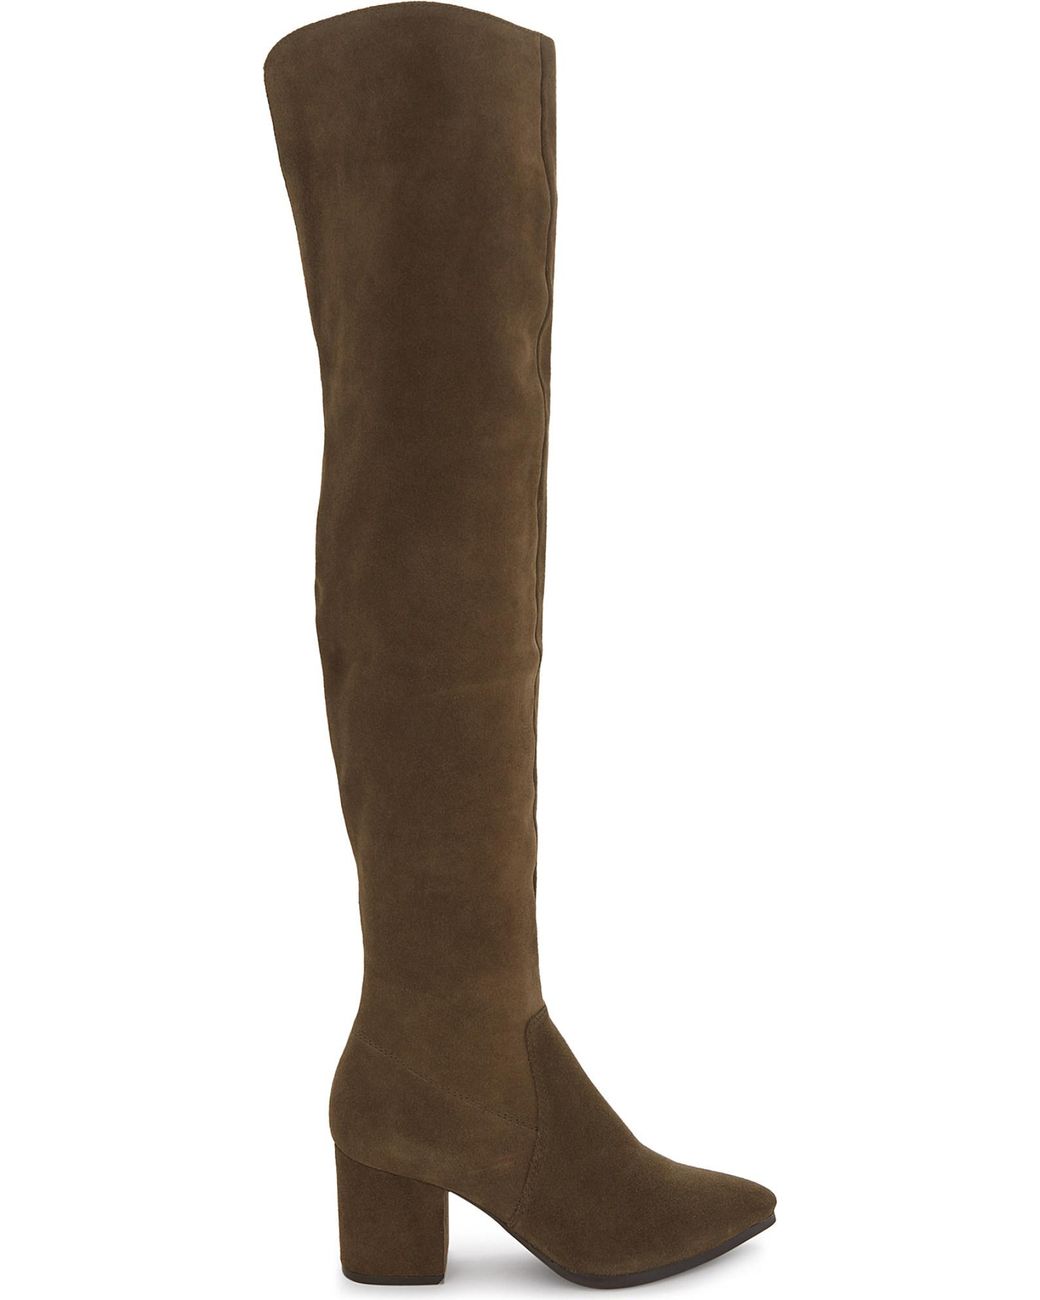 ALDO Iboewet Suede Over-the-knee Boots in Natural | Lyst